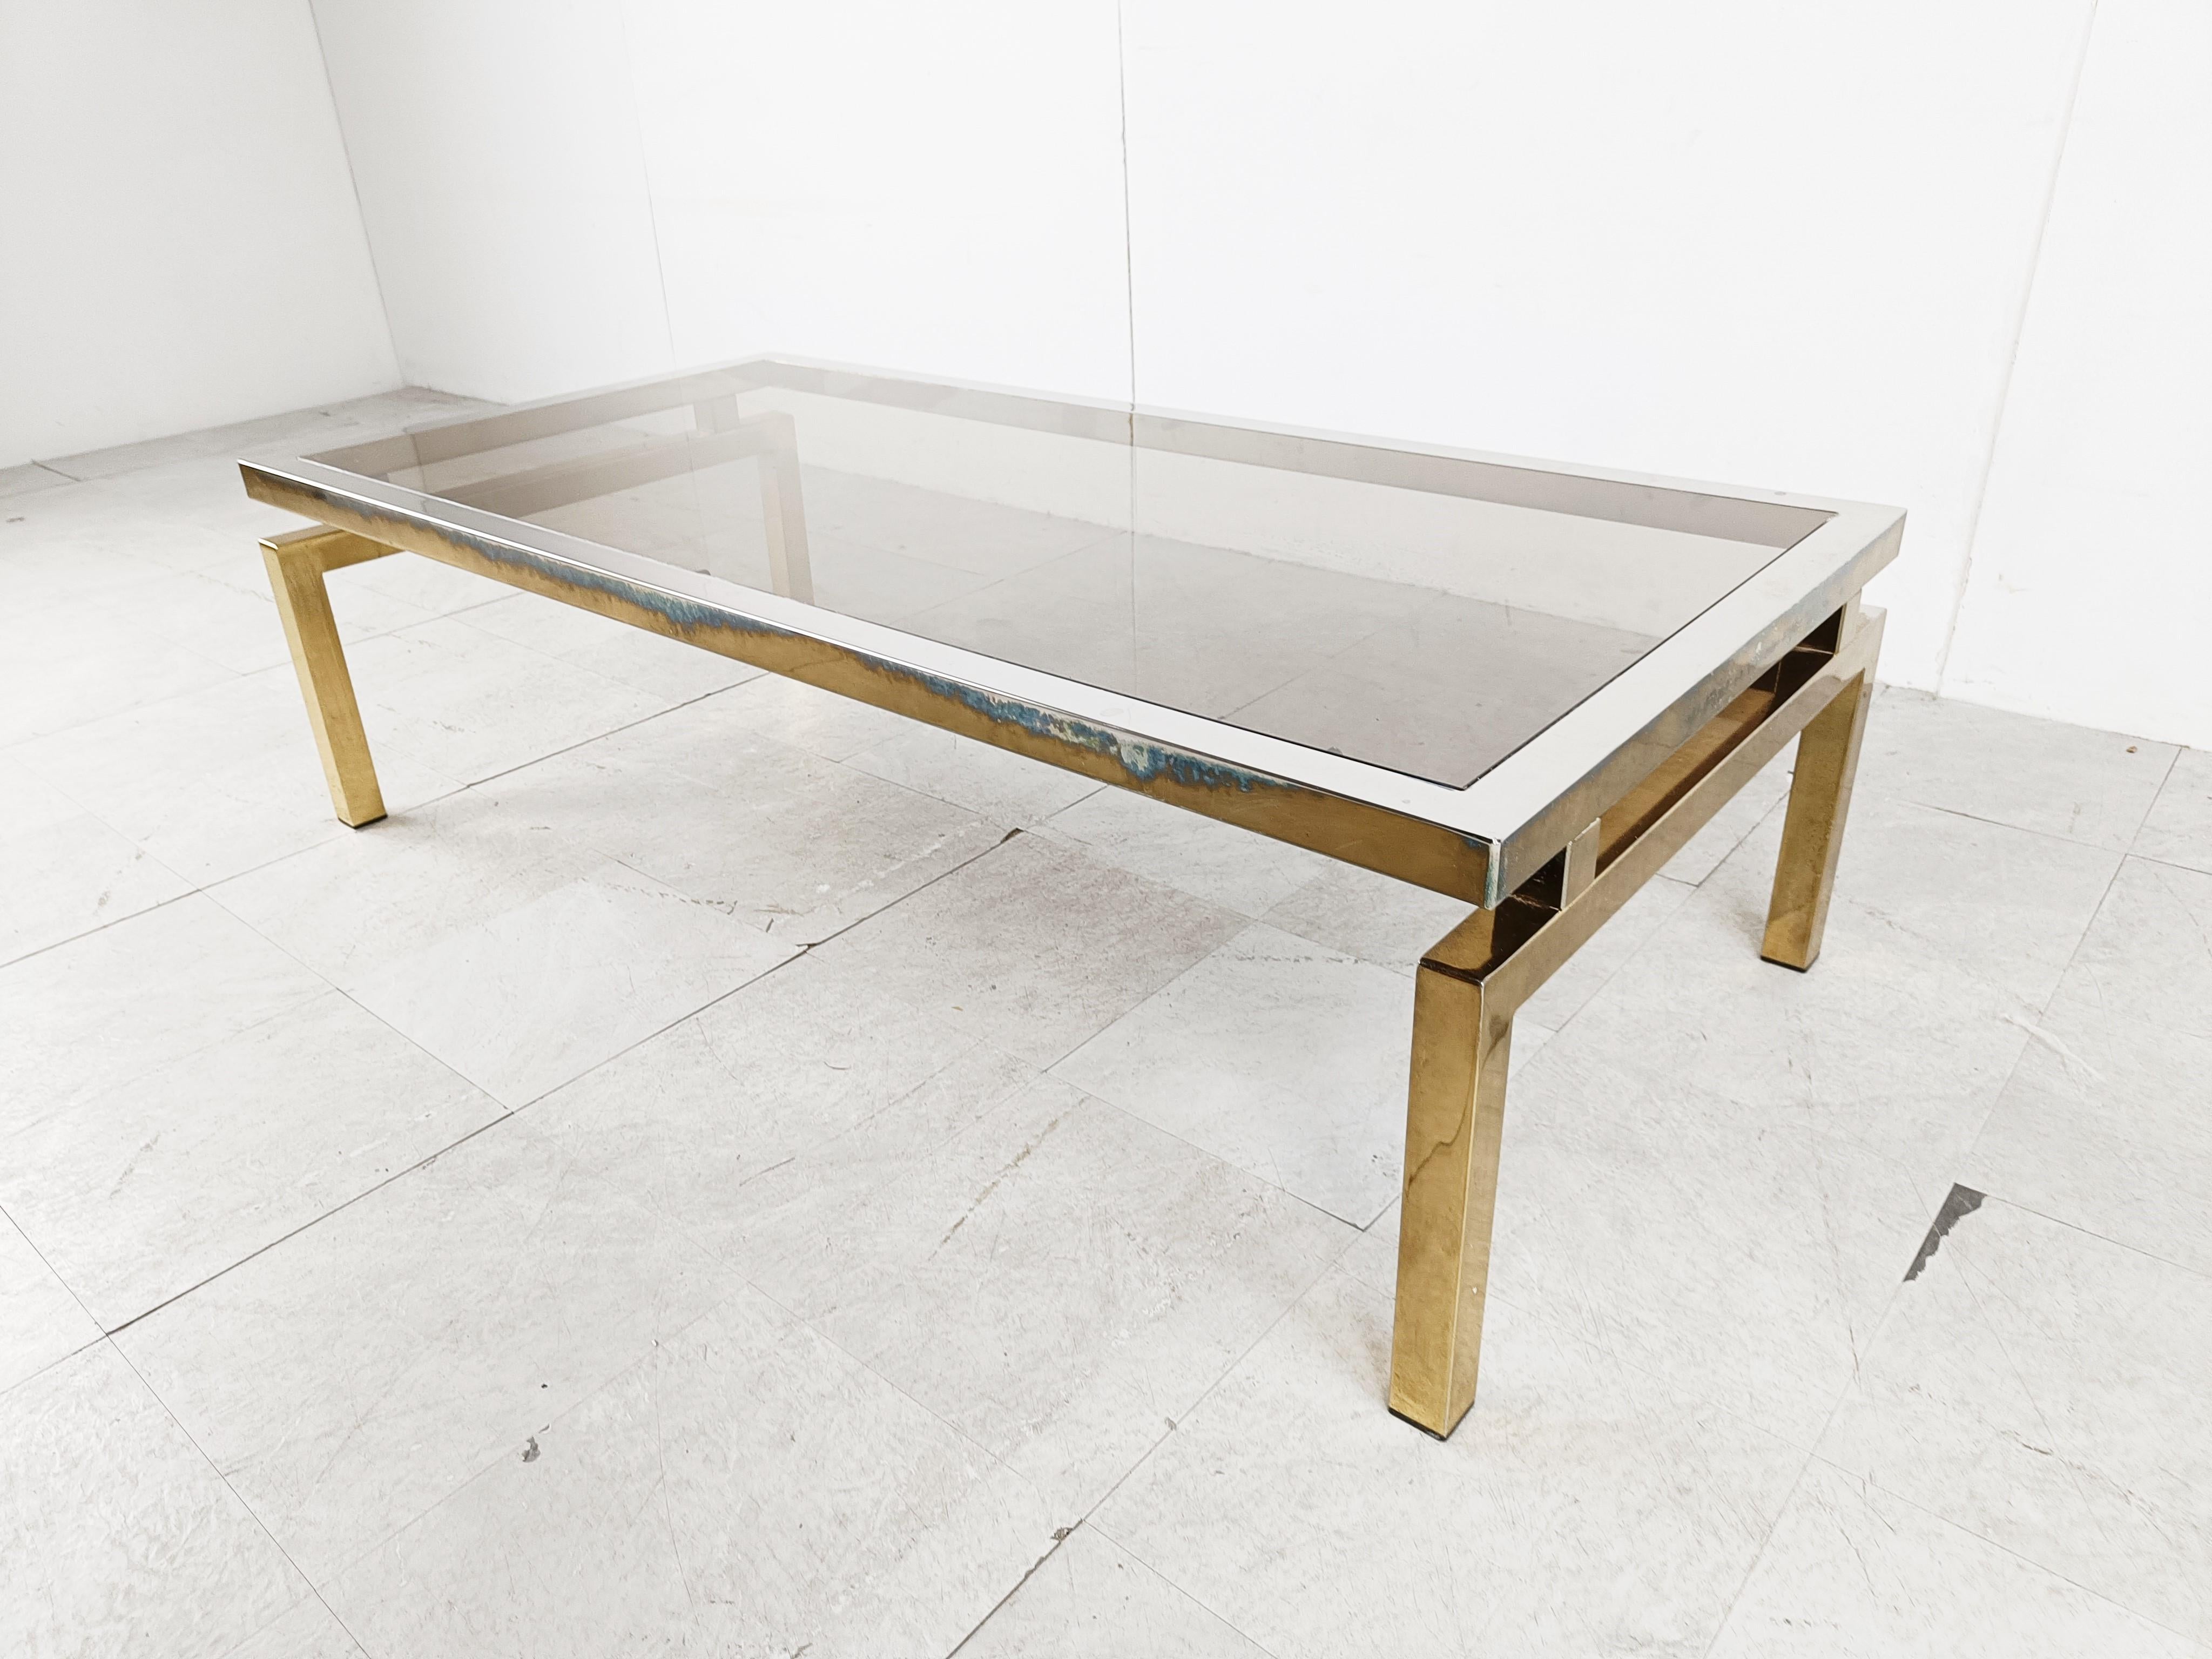 Seventies coffee table with smoked glass and a brass and chrome frame.

The brass has faded in some areas.

This is a table for someone who really likes a little 'worn' vintage look.

The table still is very elegant.

1970s -